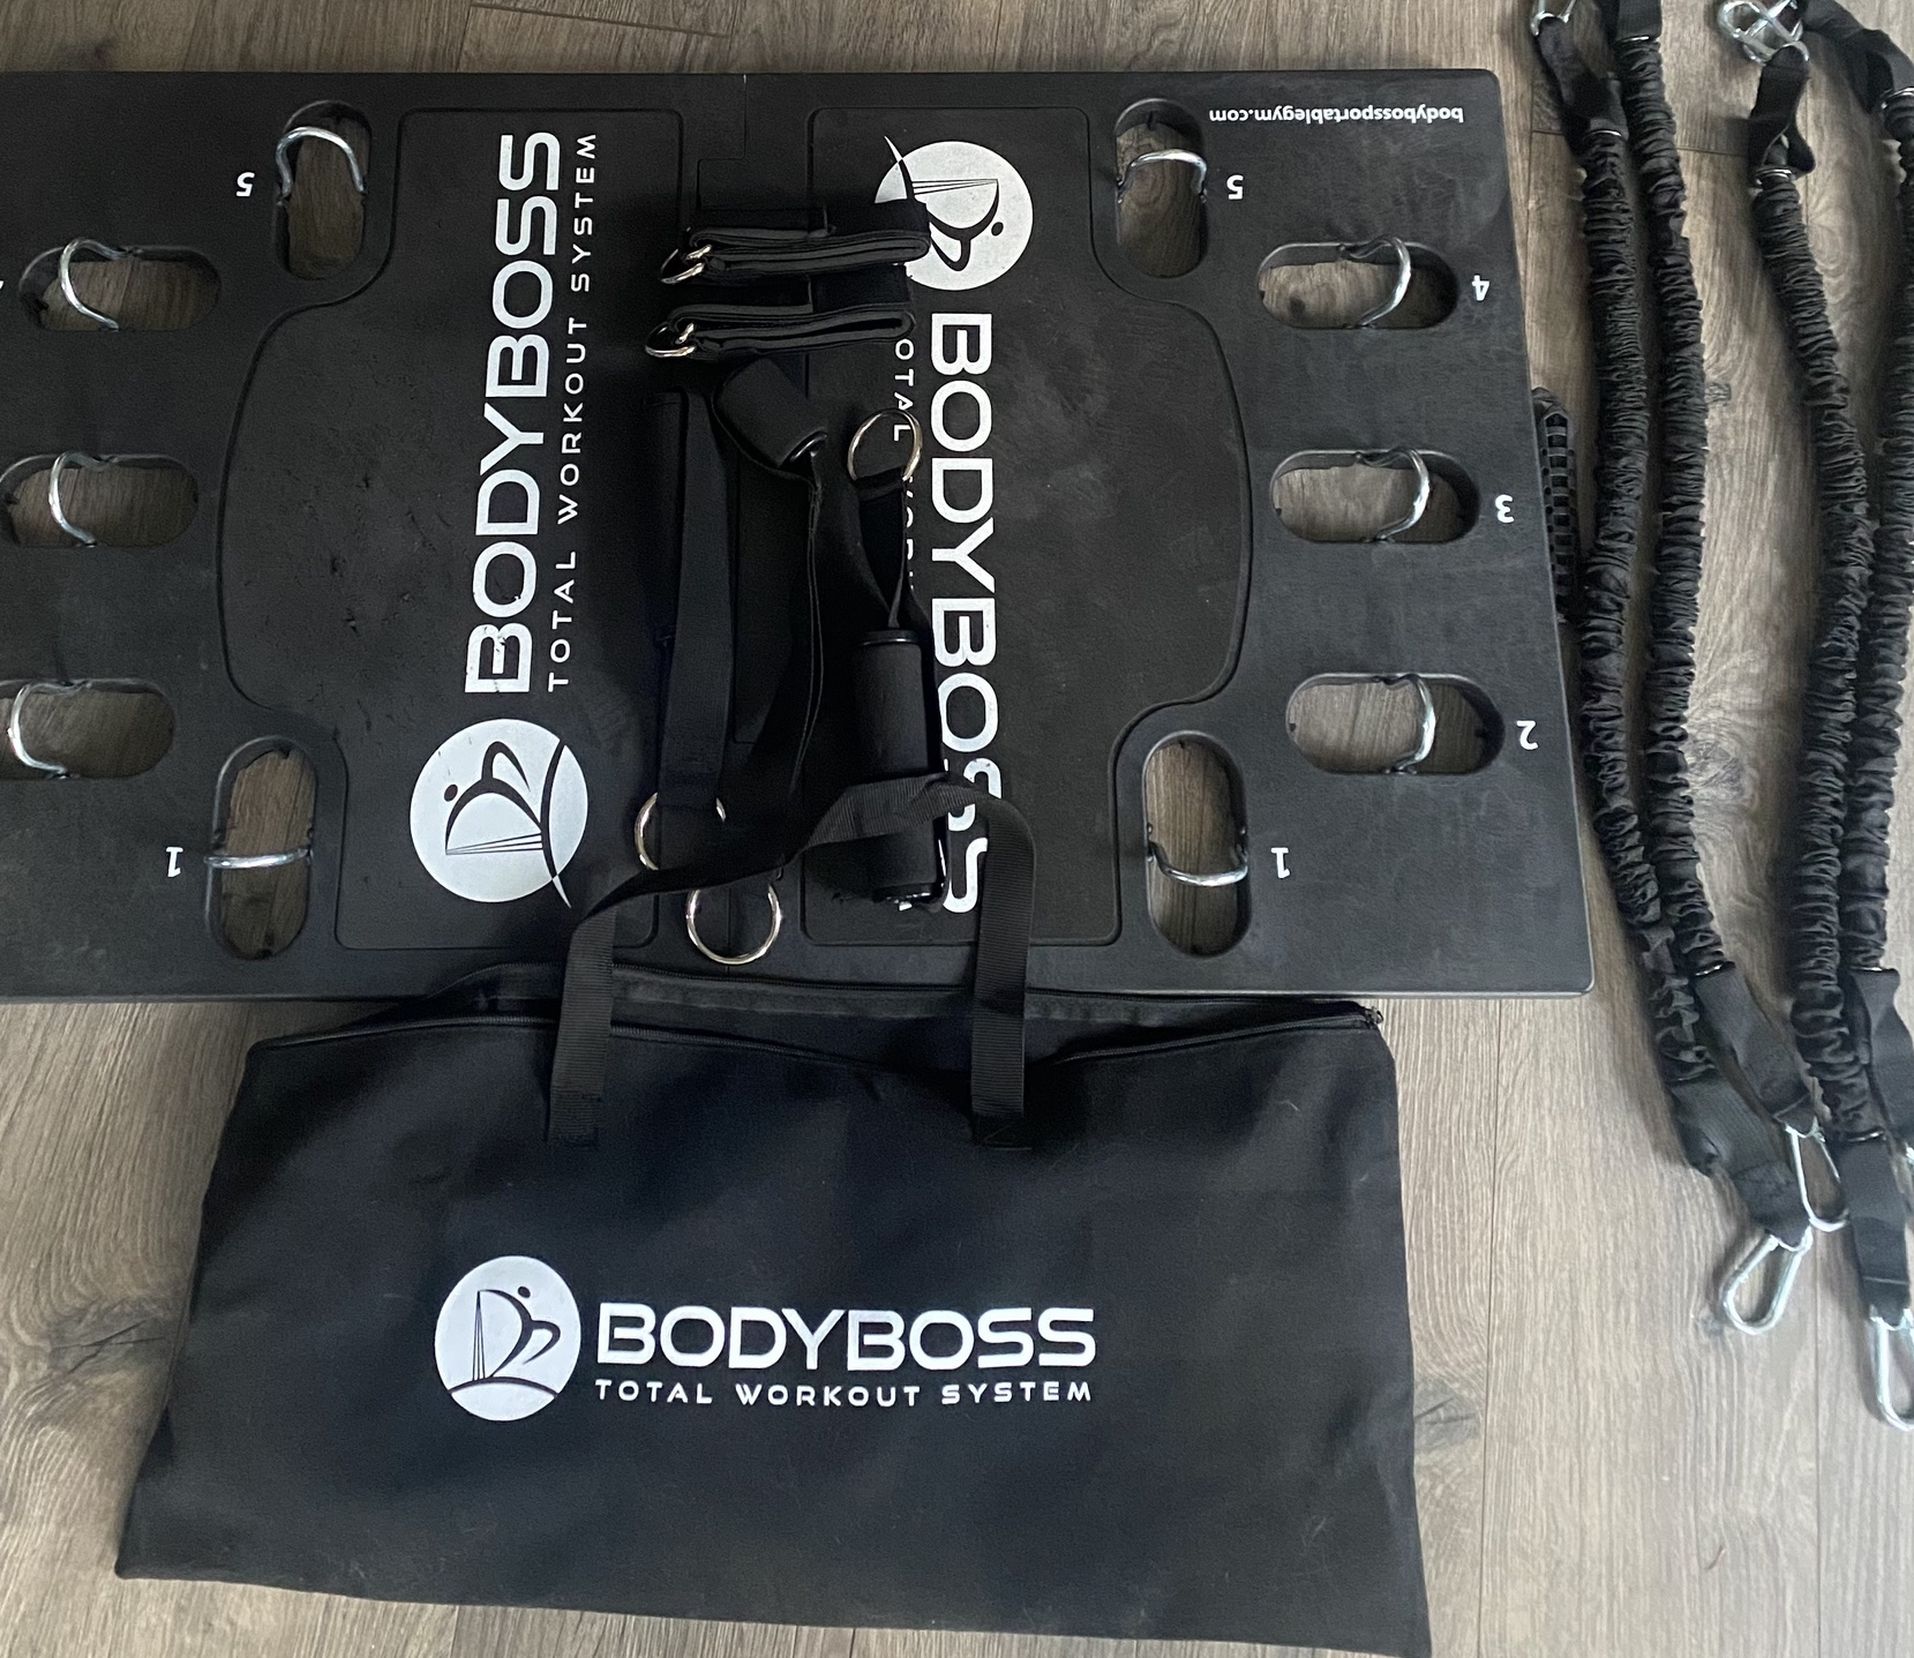 Bodyboss Total Workout System